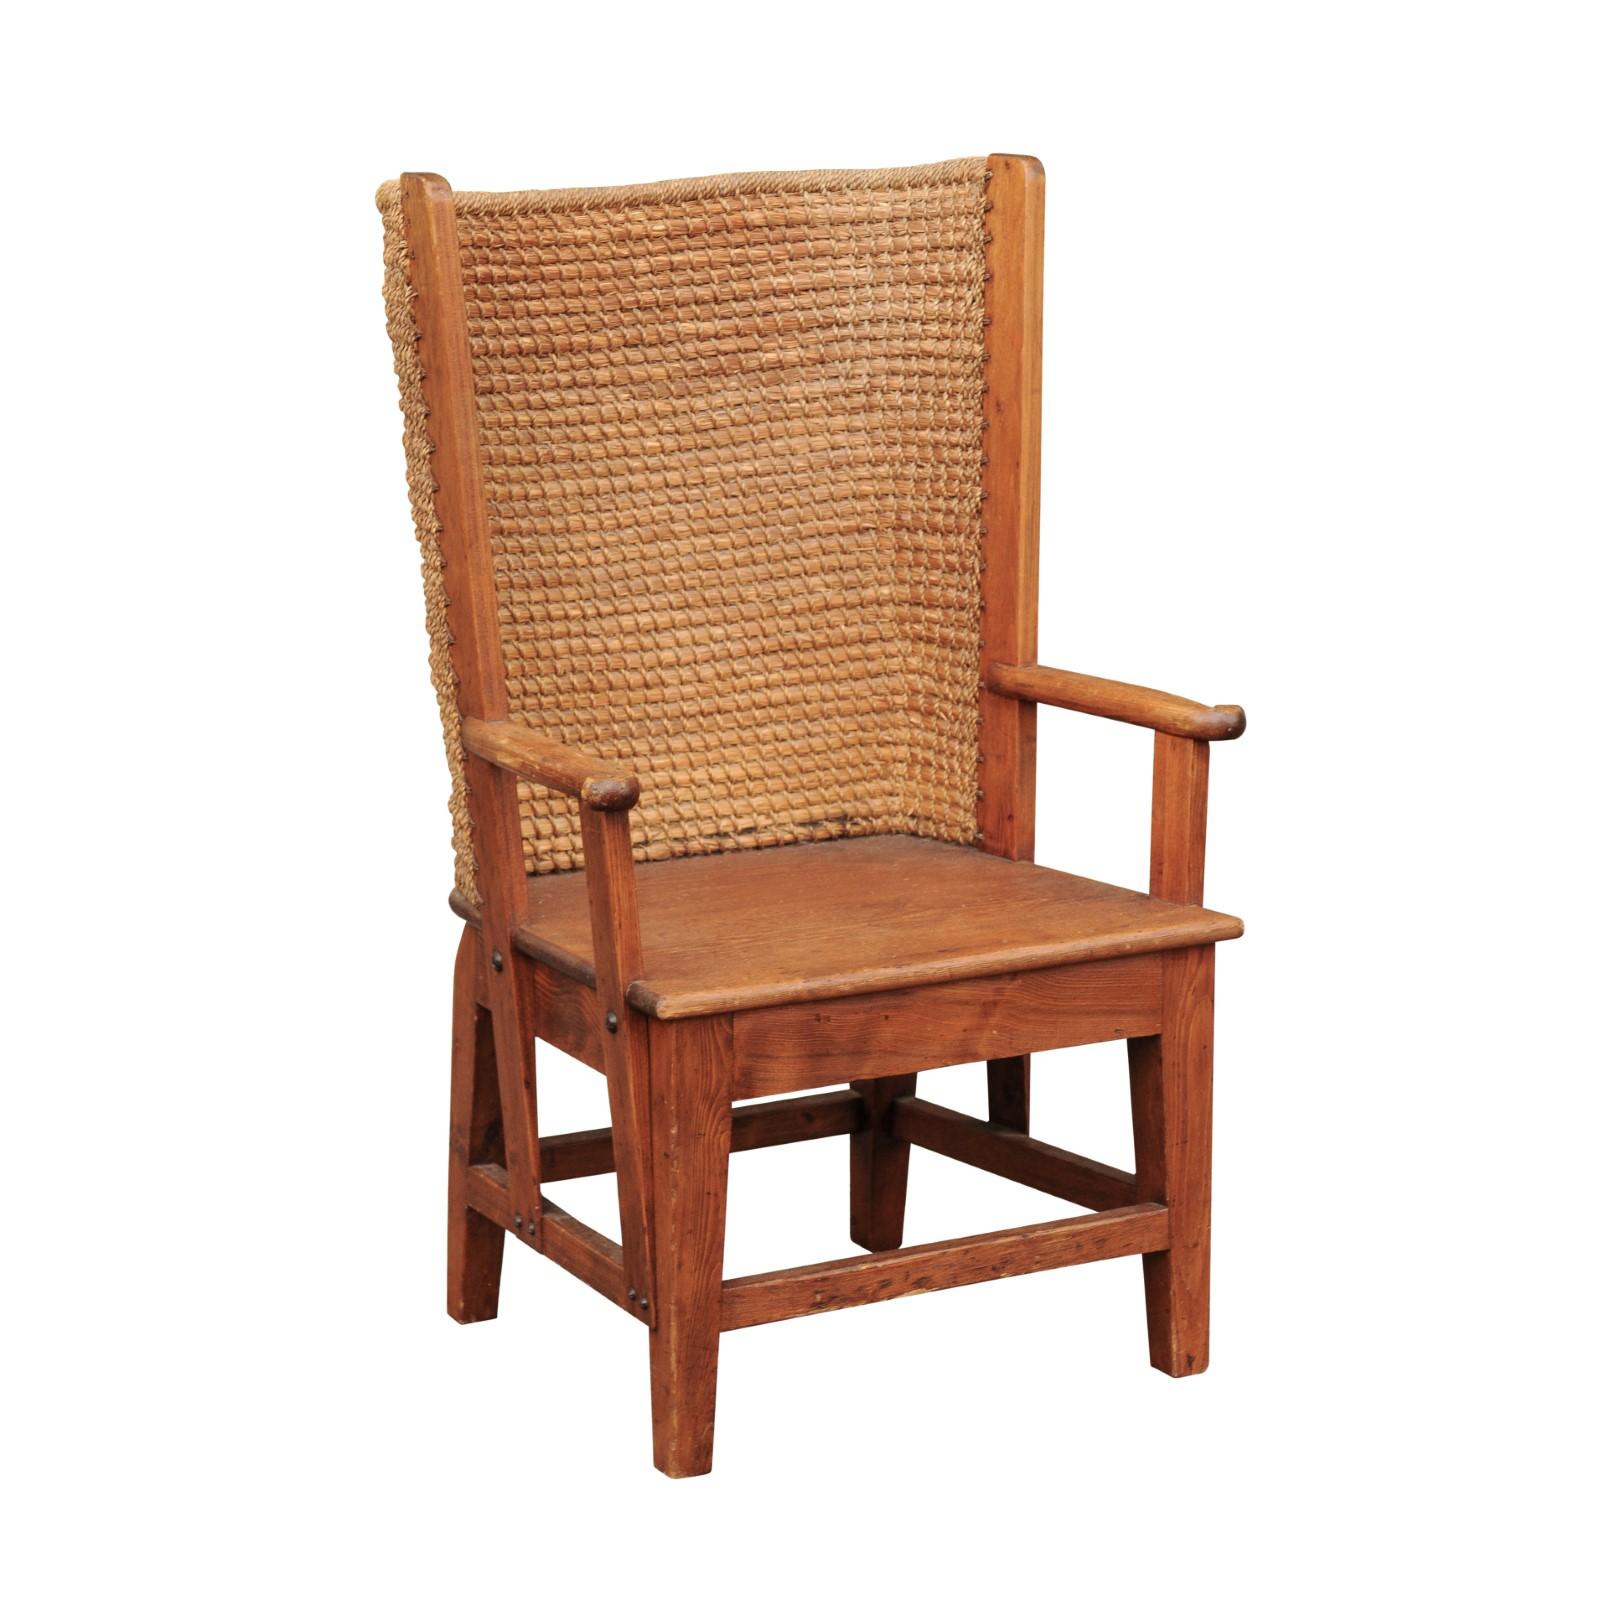 Small Scottish Orkney Wingback Chair with Handwoven Straw Back, circa 1900 For Sale